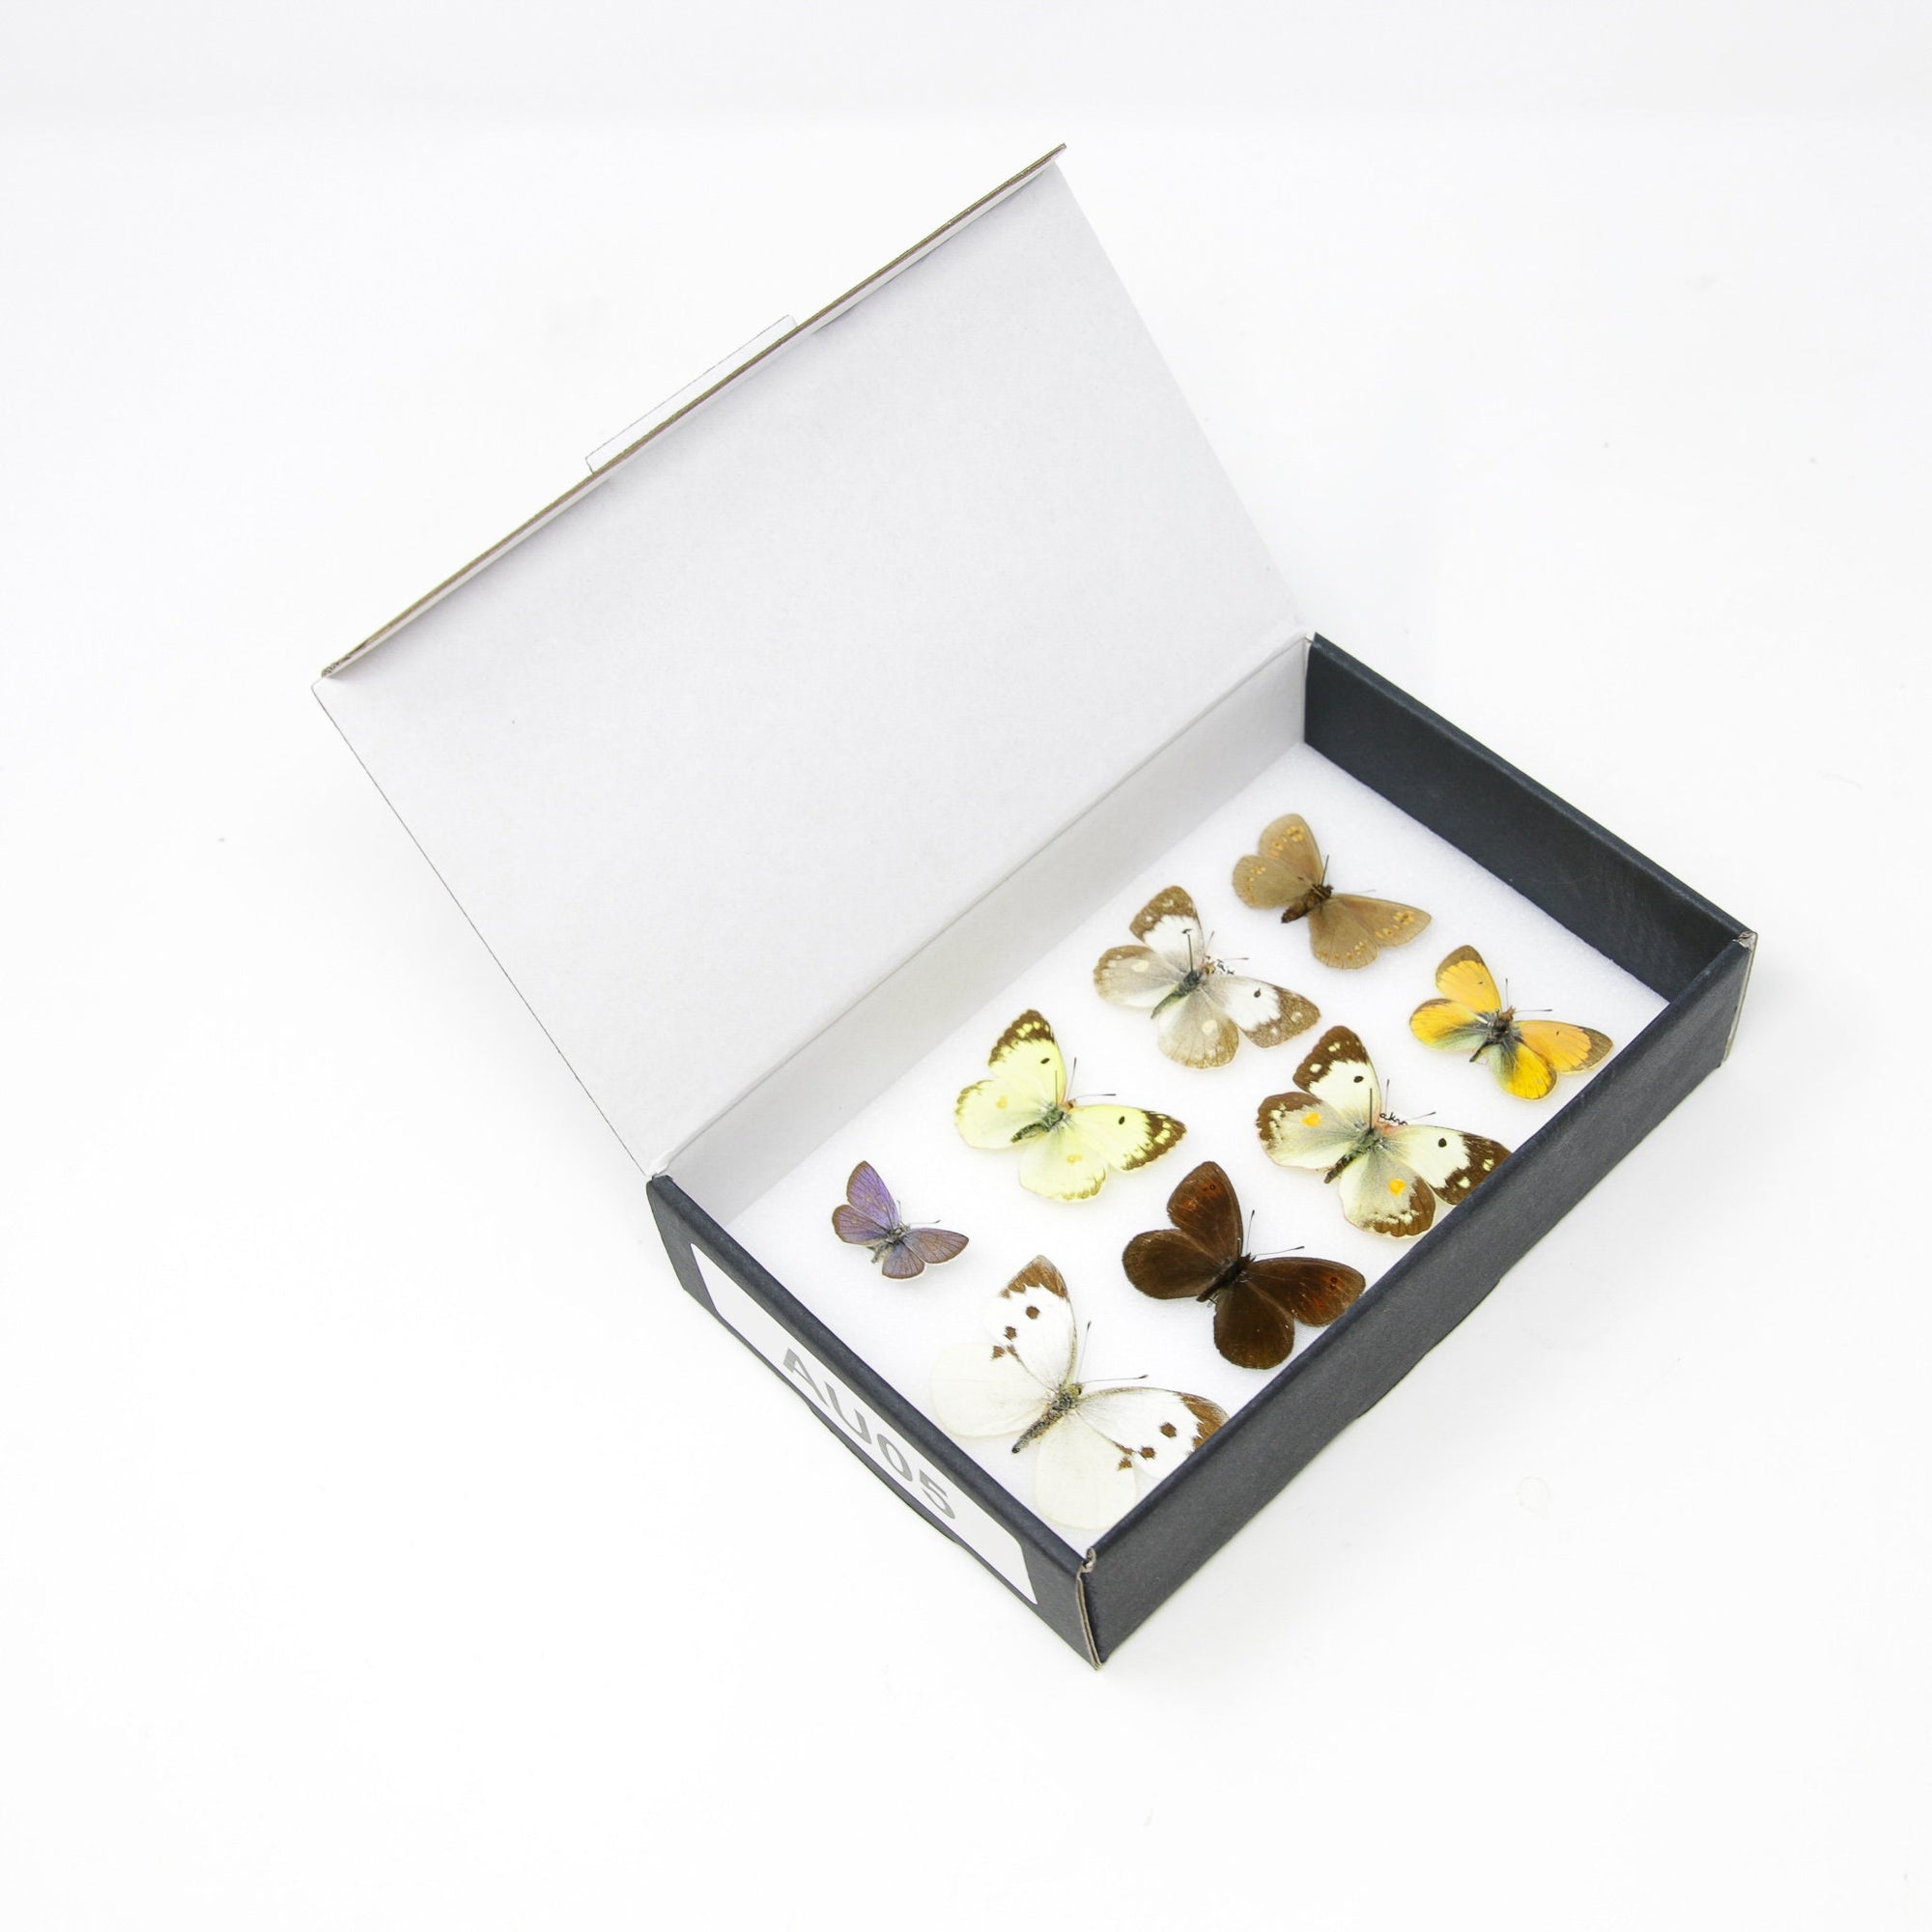 A Boxed Collection of Pretty Vintage Butterflies with Scientific Collection Data, A1 Quality, Entomology, Real Lepidoptera Specimens #AU05